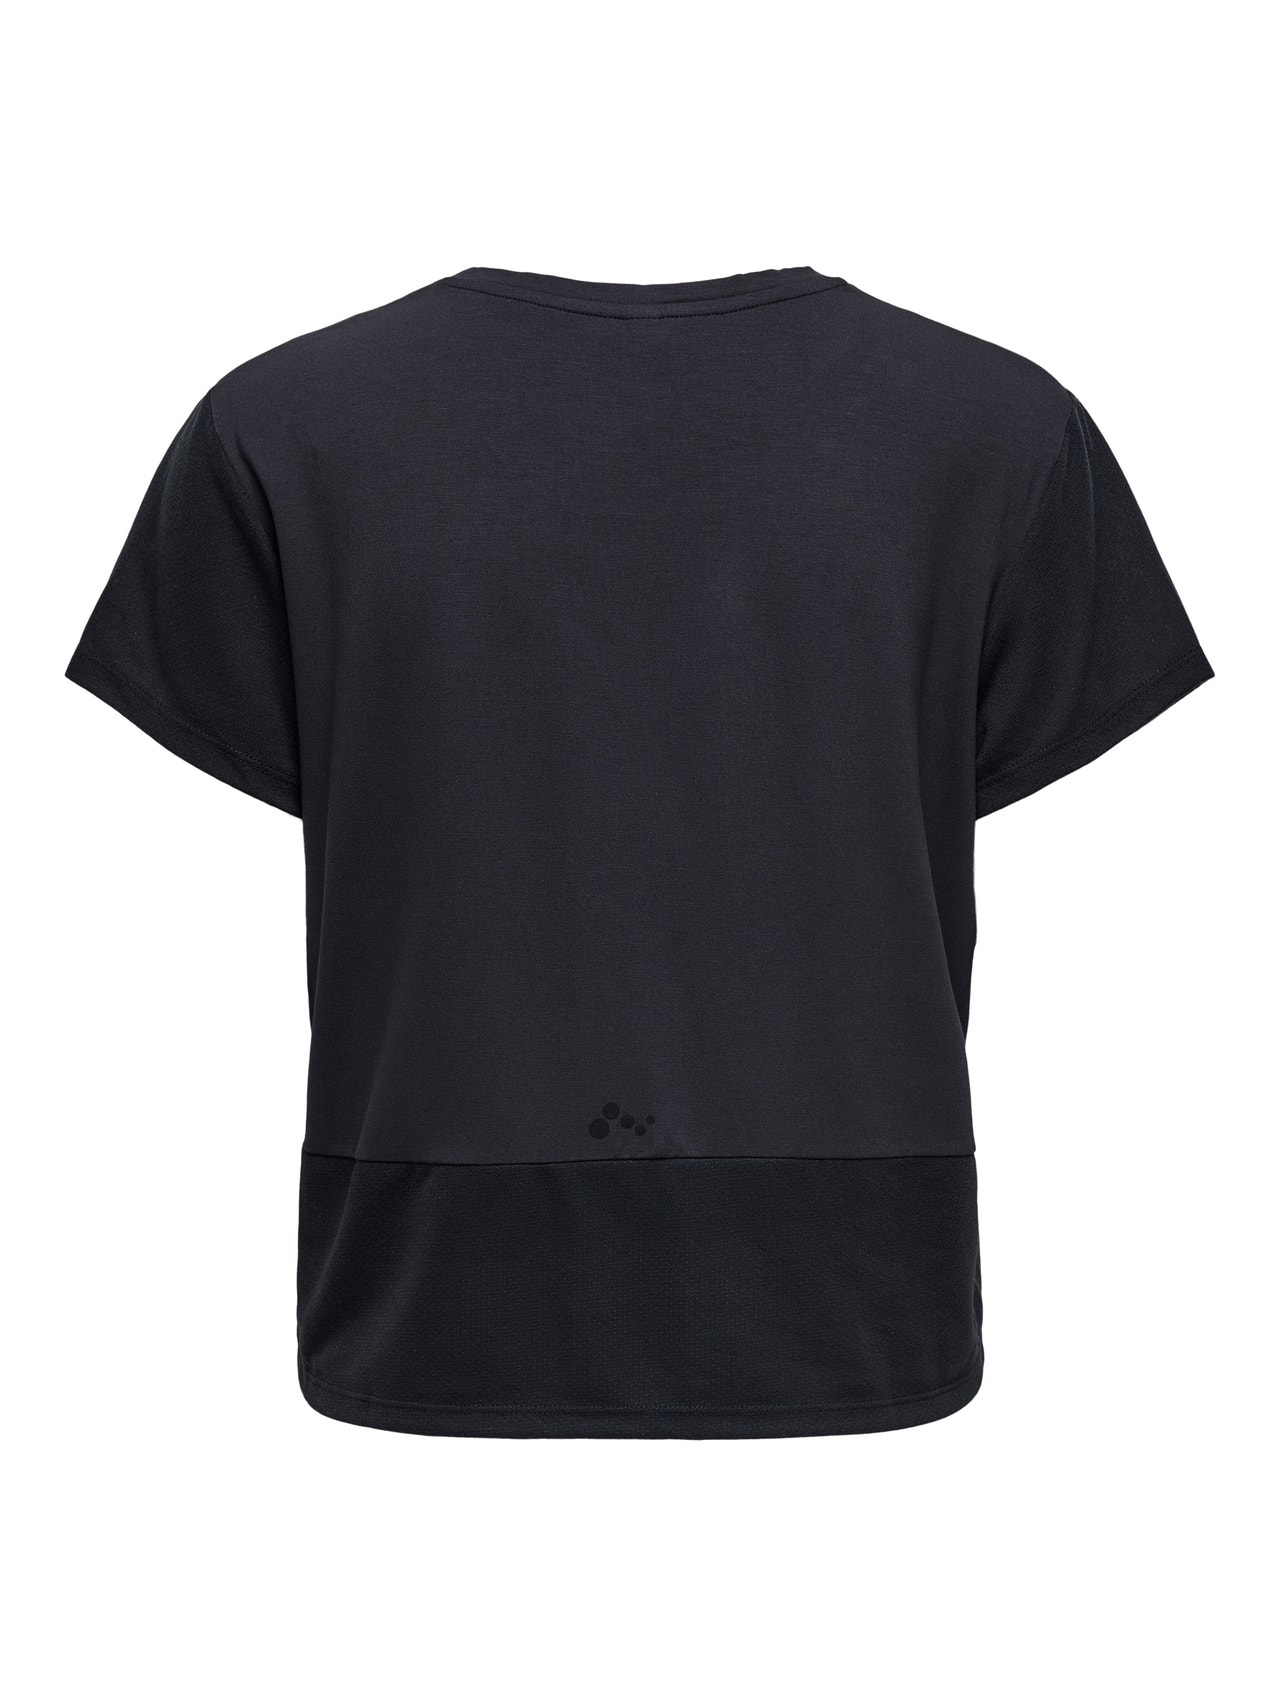 ONLY Cropped Training Top -Blue Graphite - 15217863